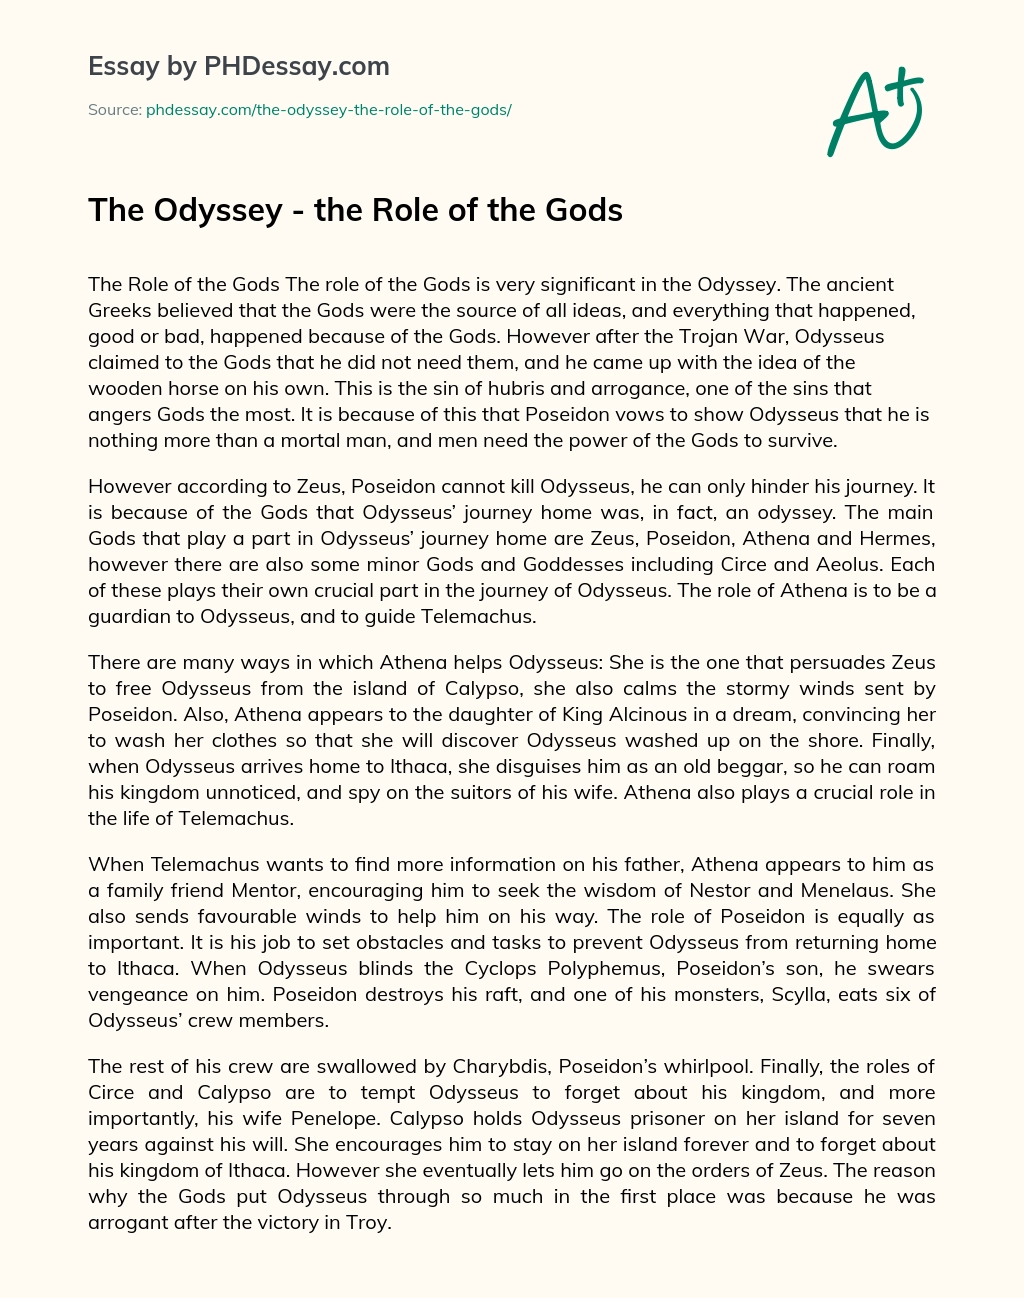 The Odyssey – the Role of the Gods essay